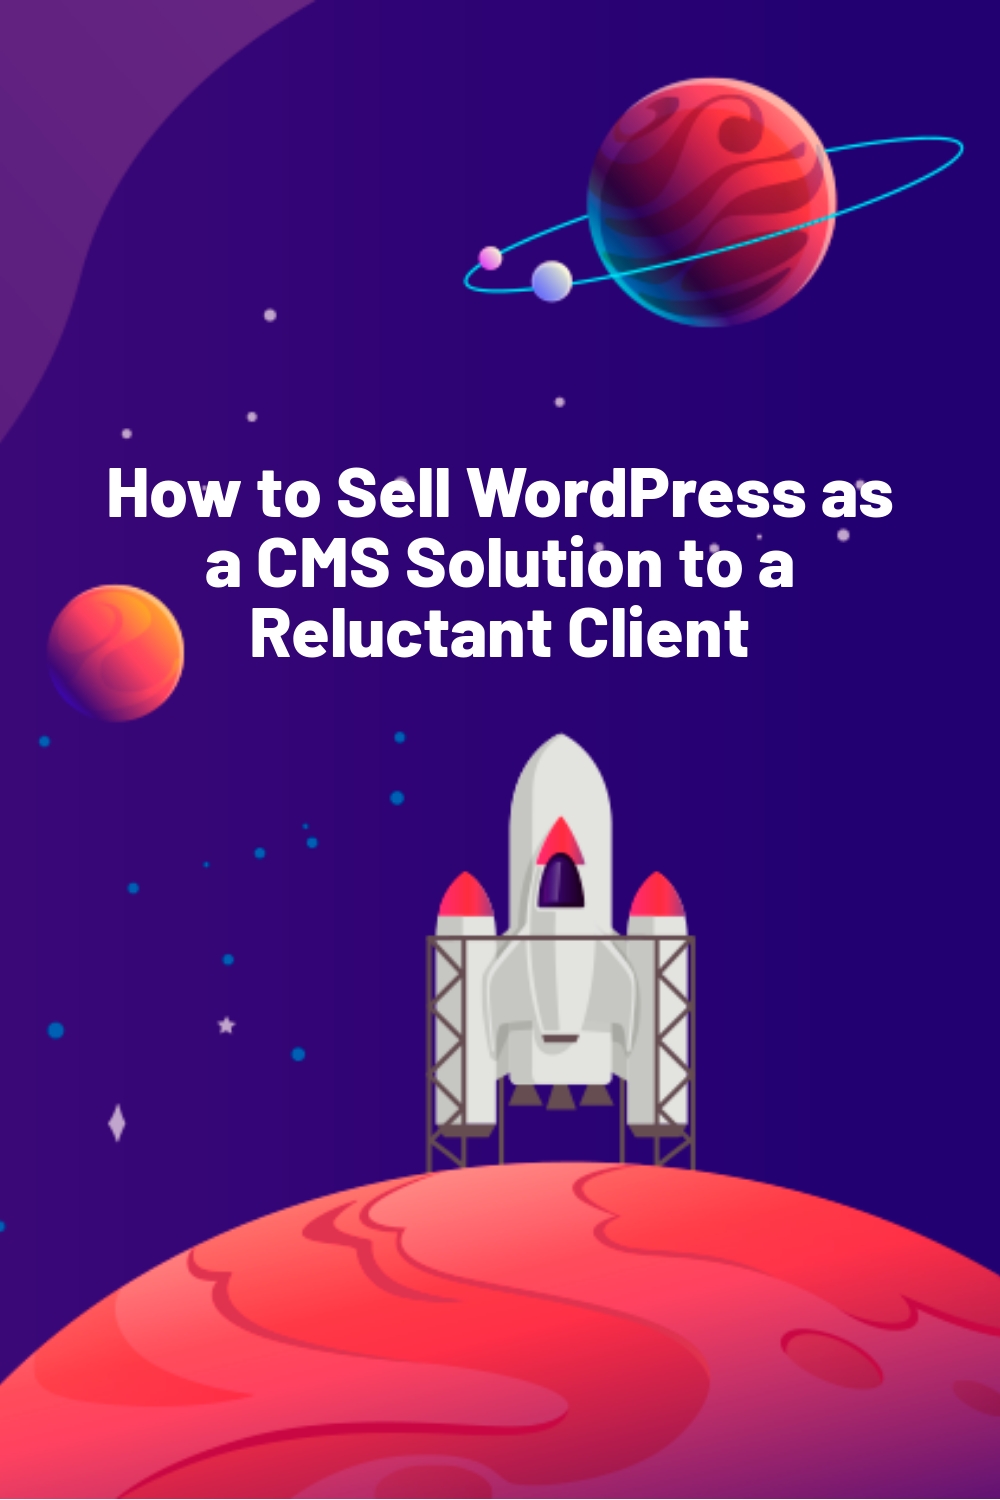 How to Sell WordPress as a CMS Solution to a Reluctant Client